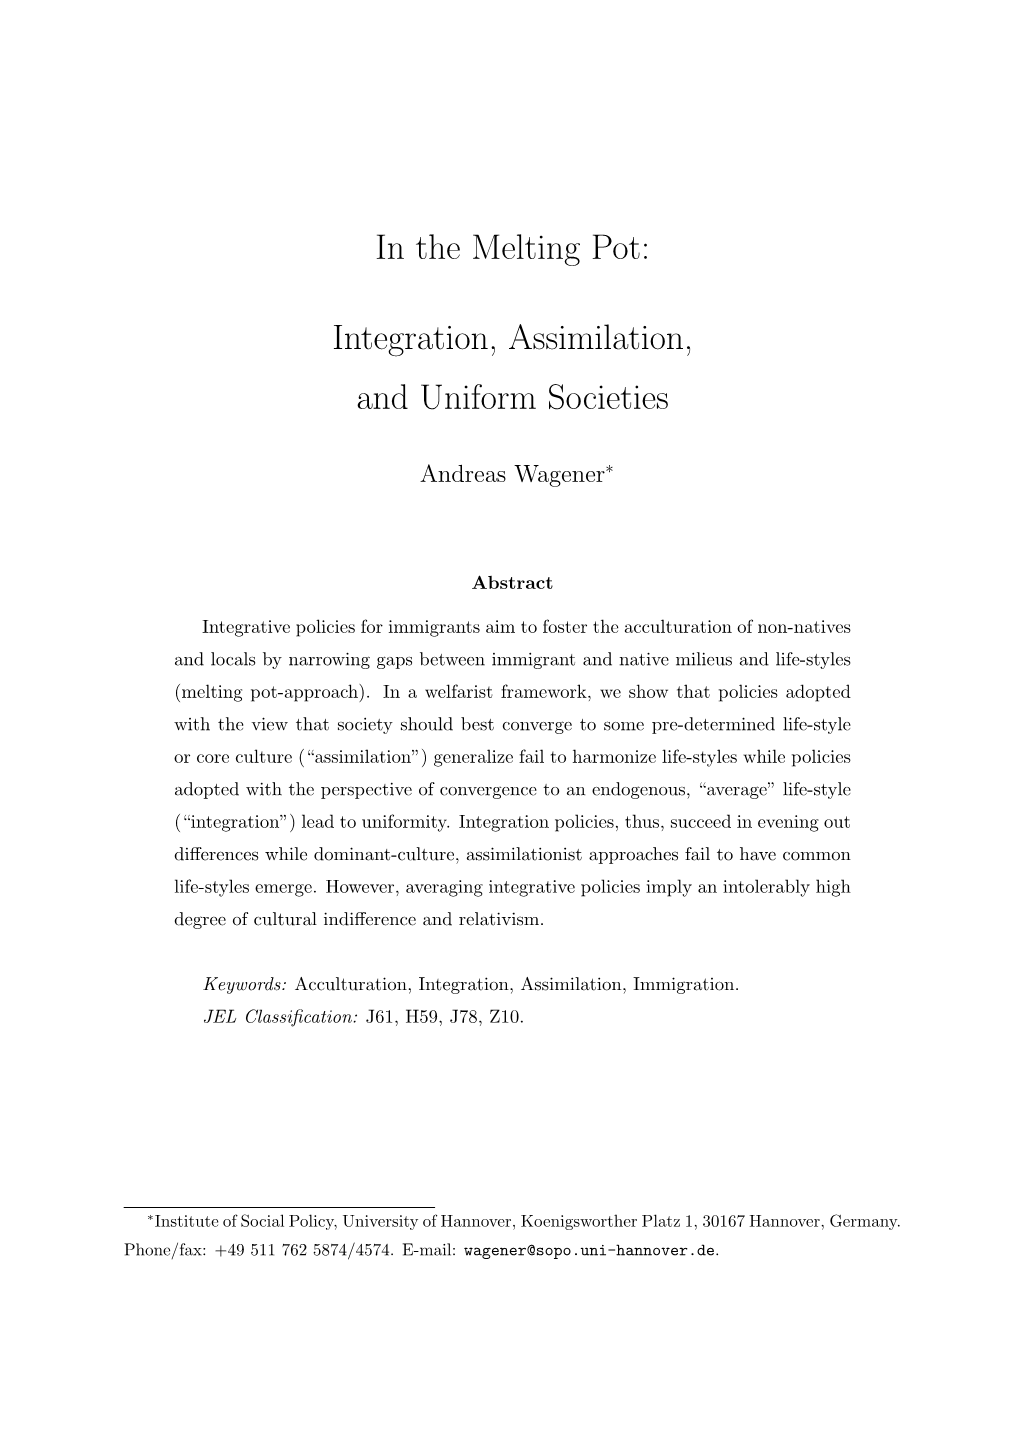 In the Melting Pot: Integration, Assimilation, and Uniform Societies